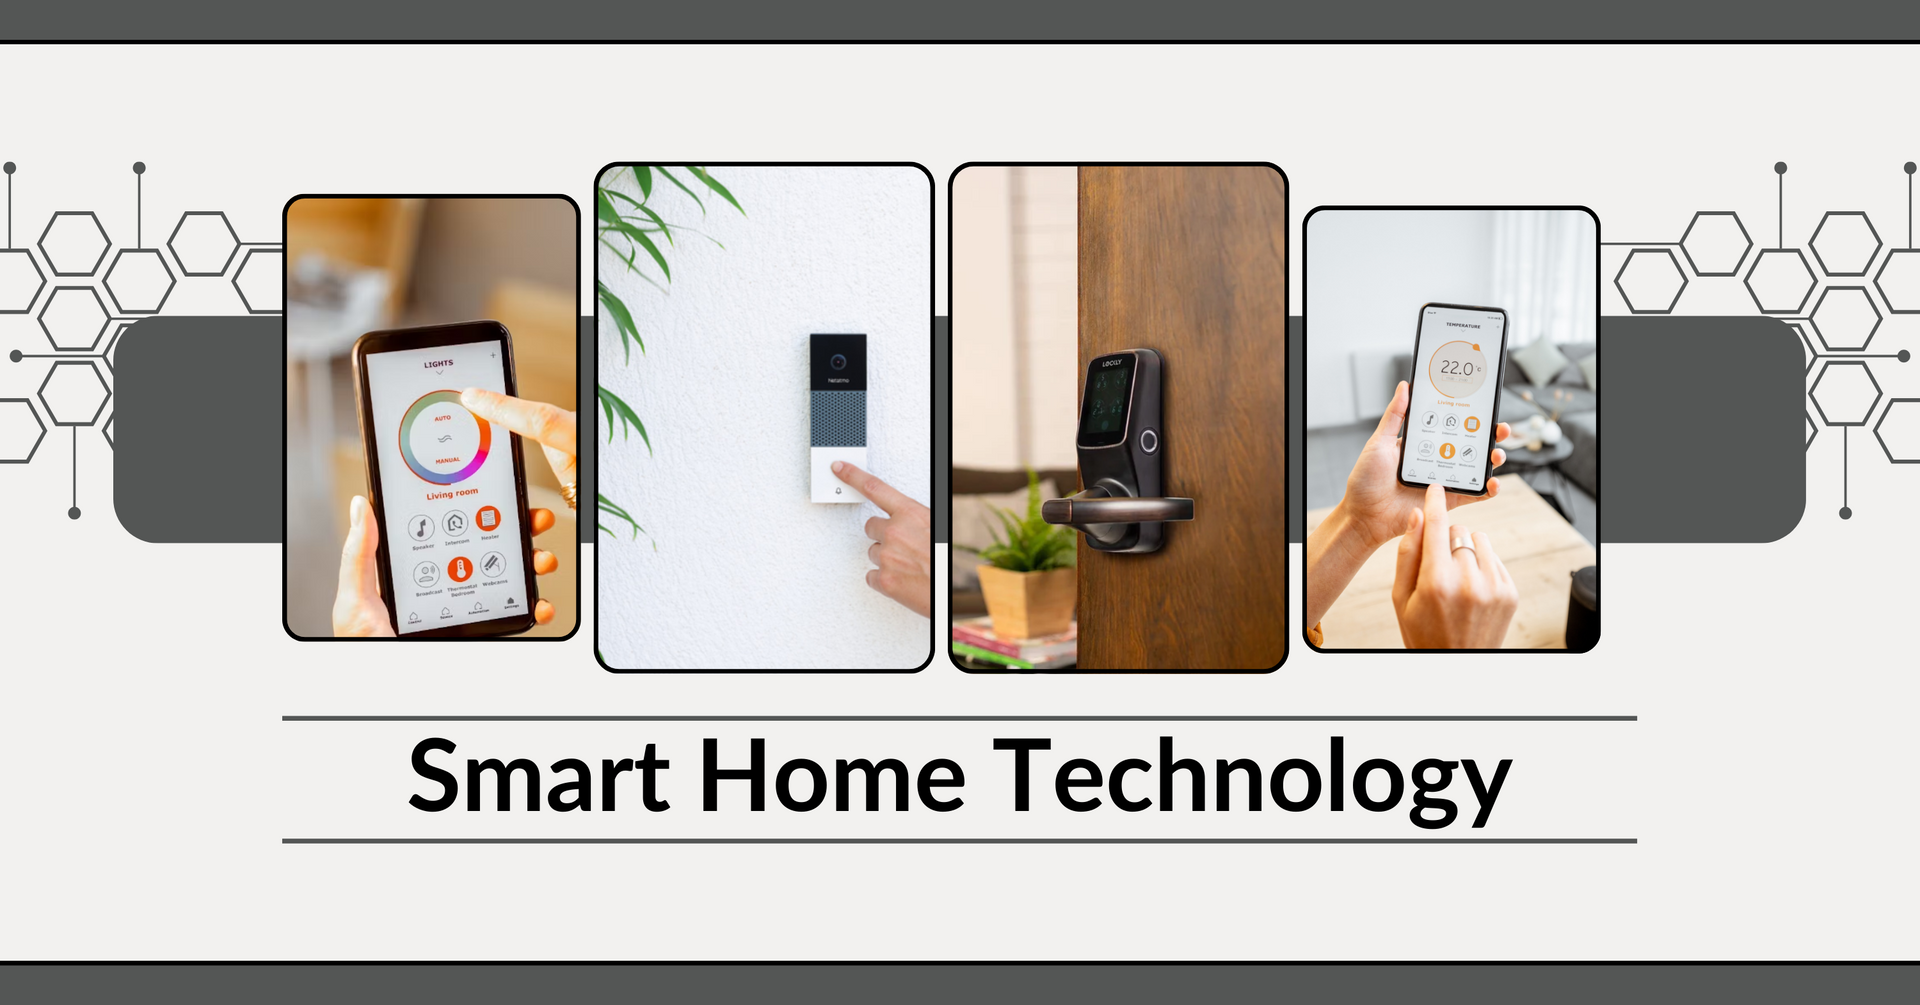 A person is holding a smart home technology device in their hand.